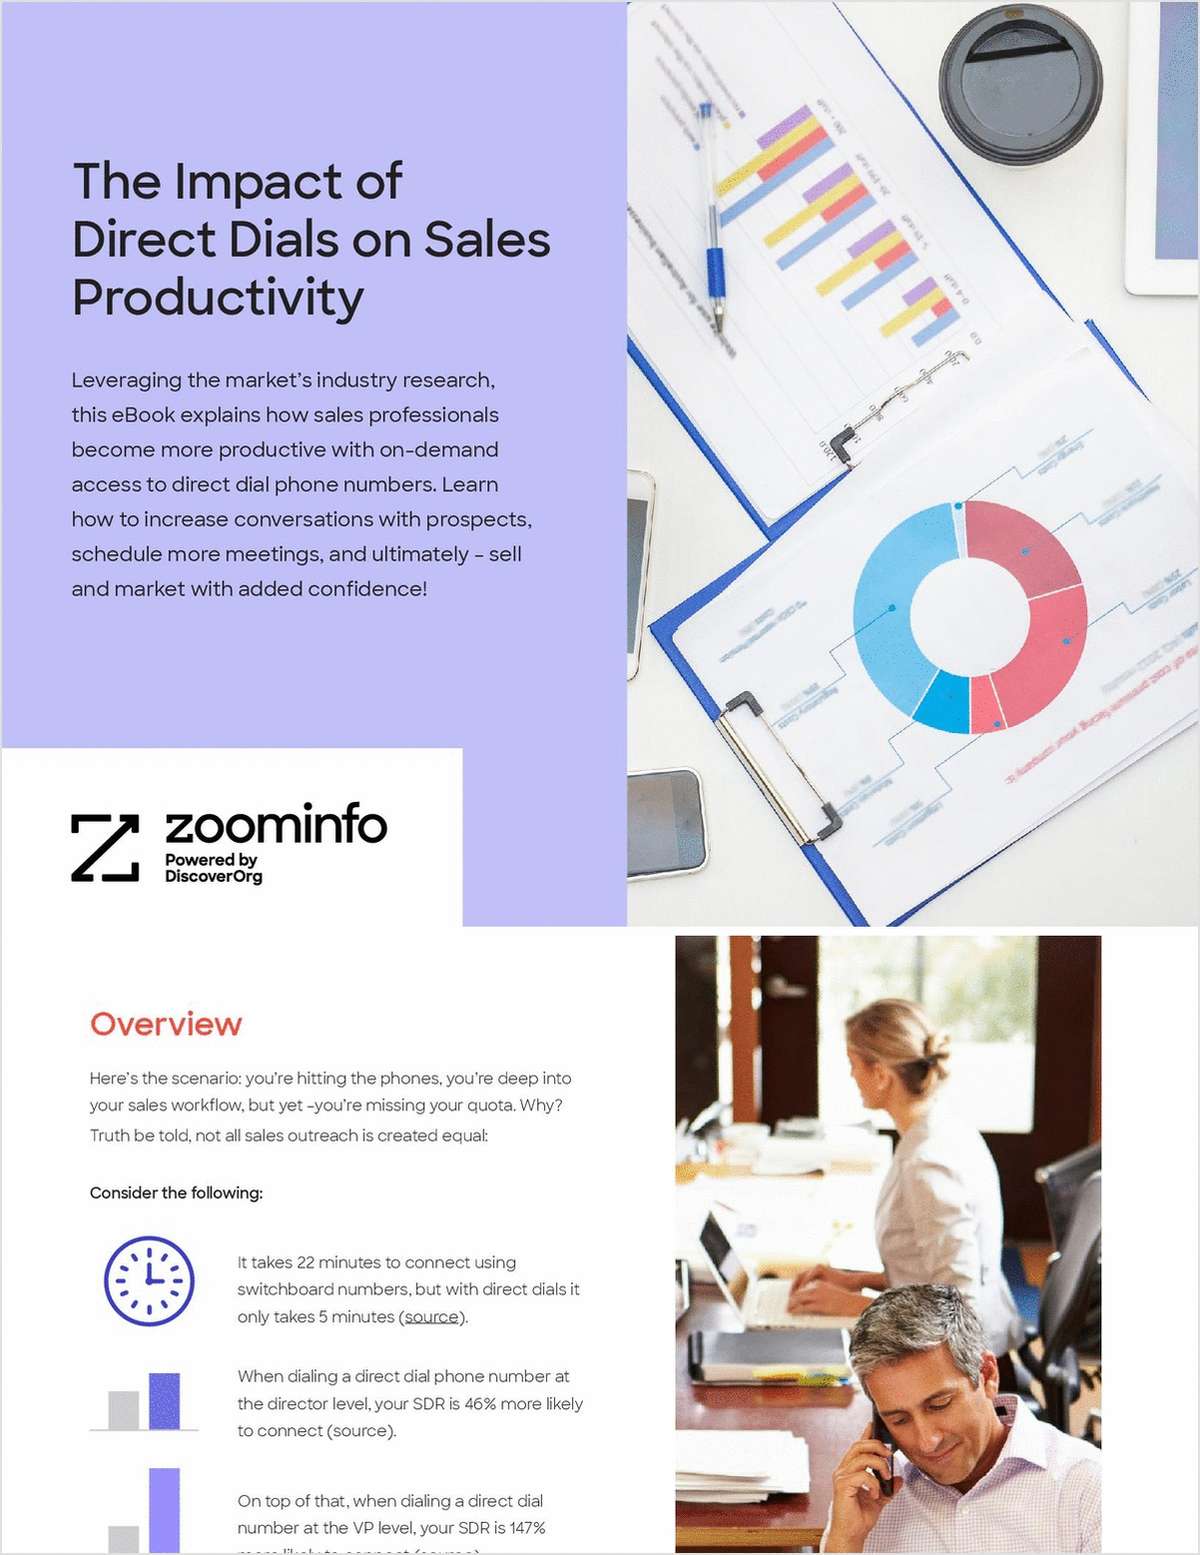 The Impact of Direct Dials on Sales Productivity